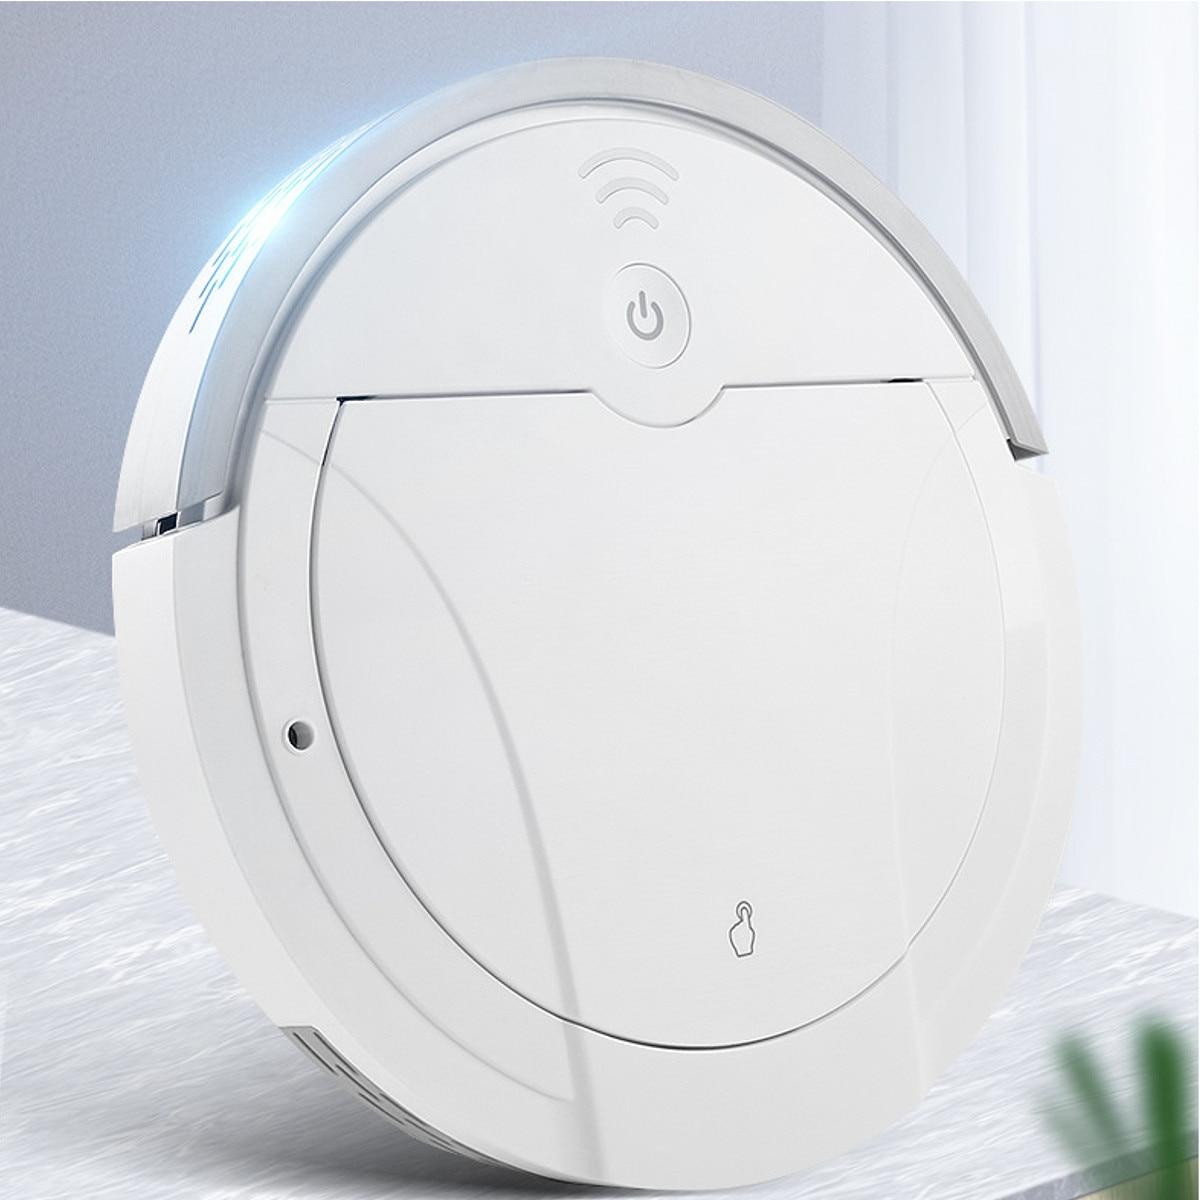 5-in-1 Fully Automatic Multifunctional Smart Robot Vacuum Cleaner USB Charging Sweeping Robot Dry/Wet UV Disinfection Cleaner